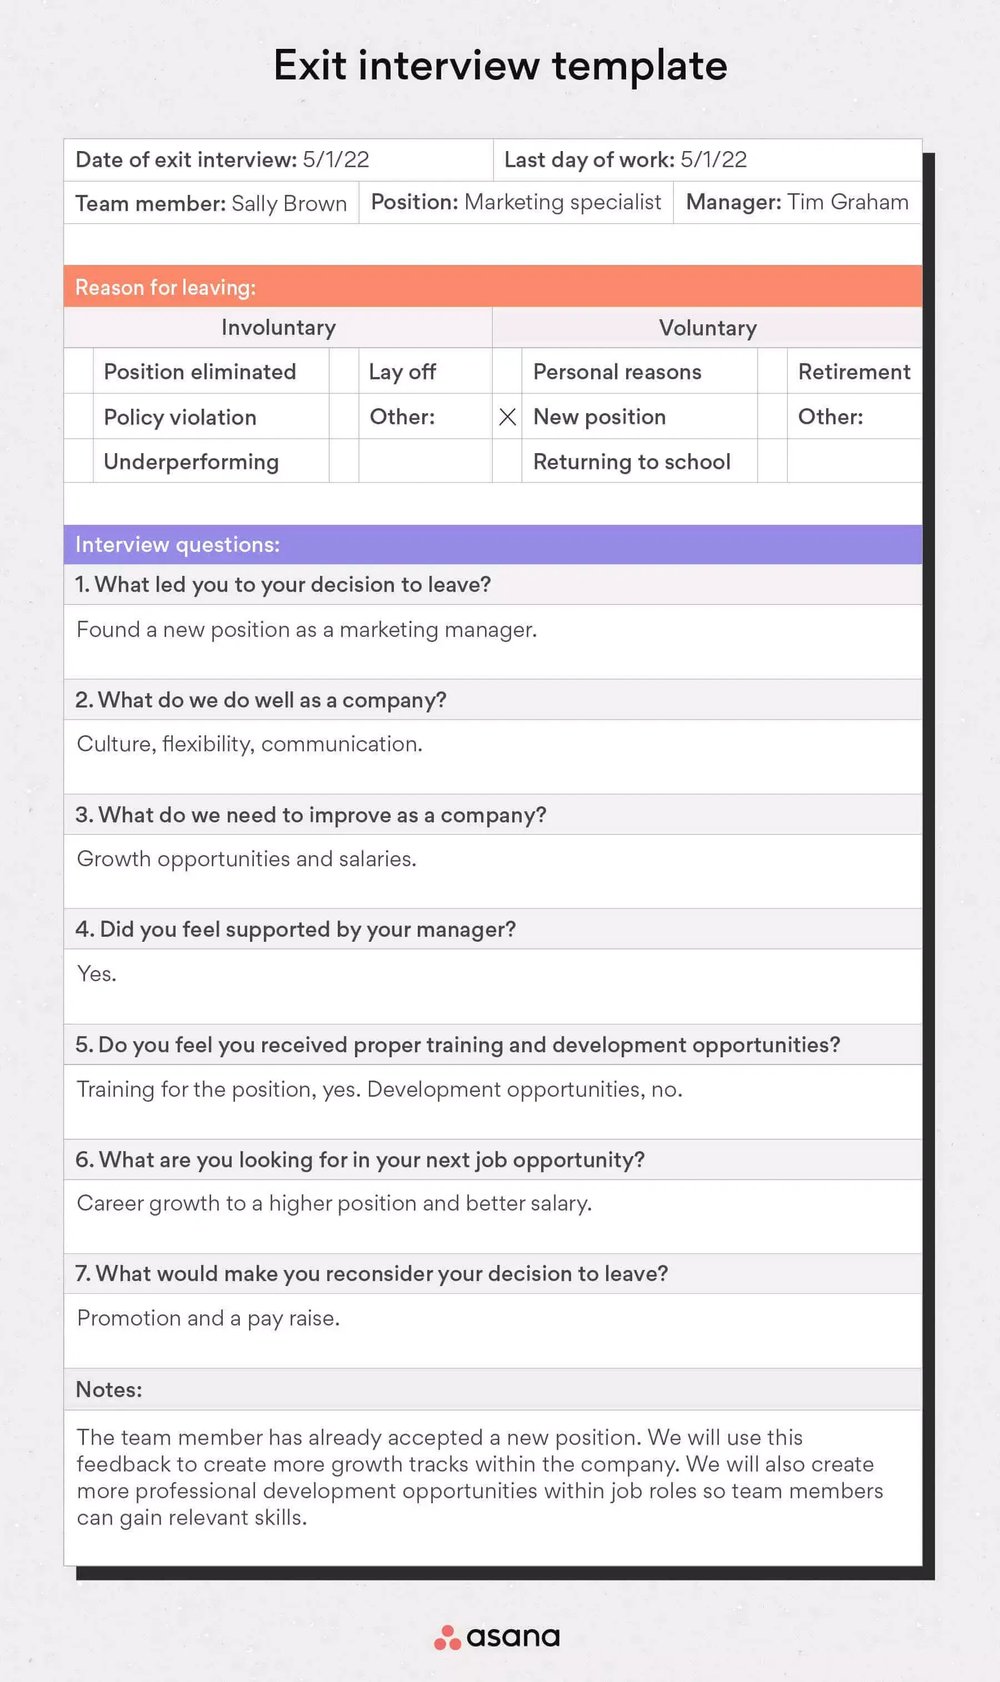 Exit interview template and example by Asana. Source: Asana blog